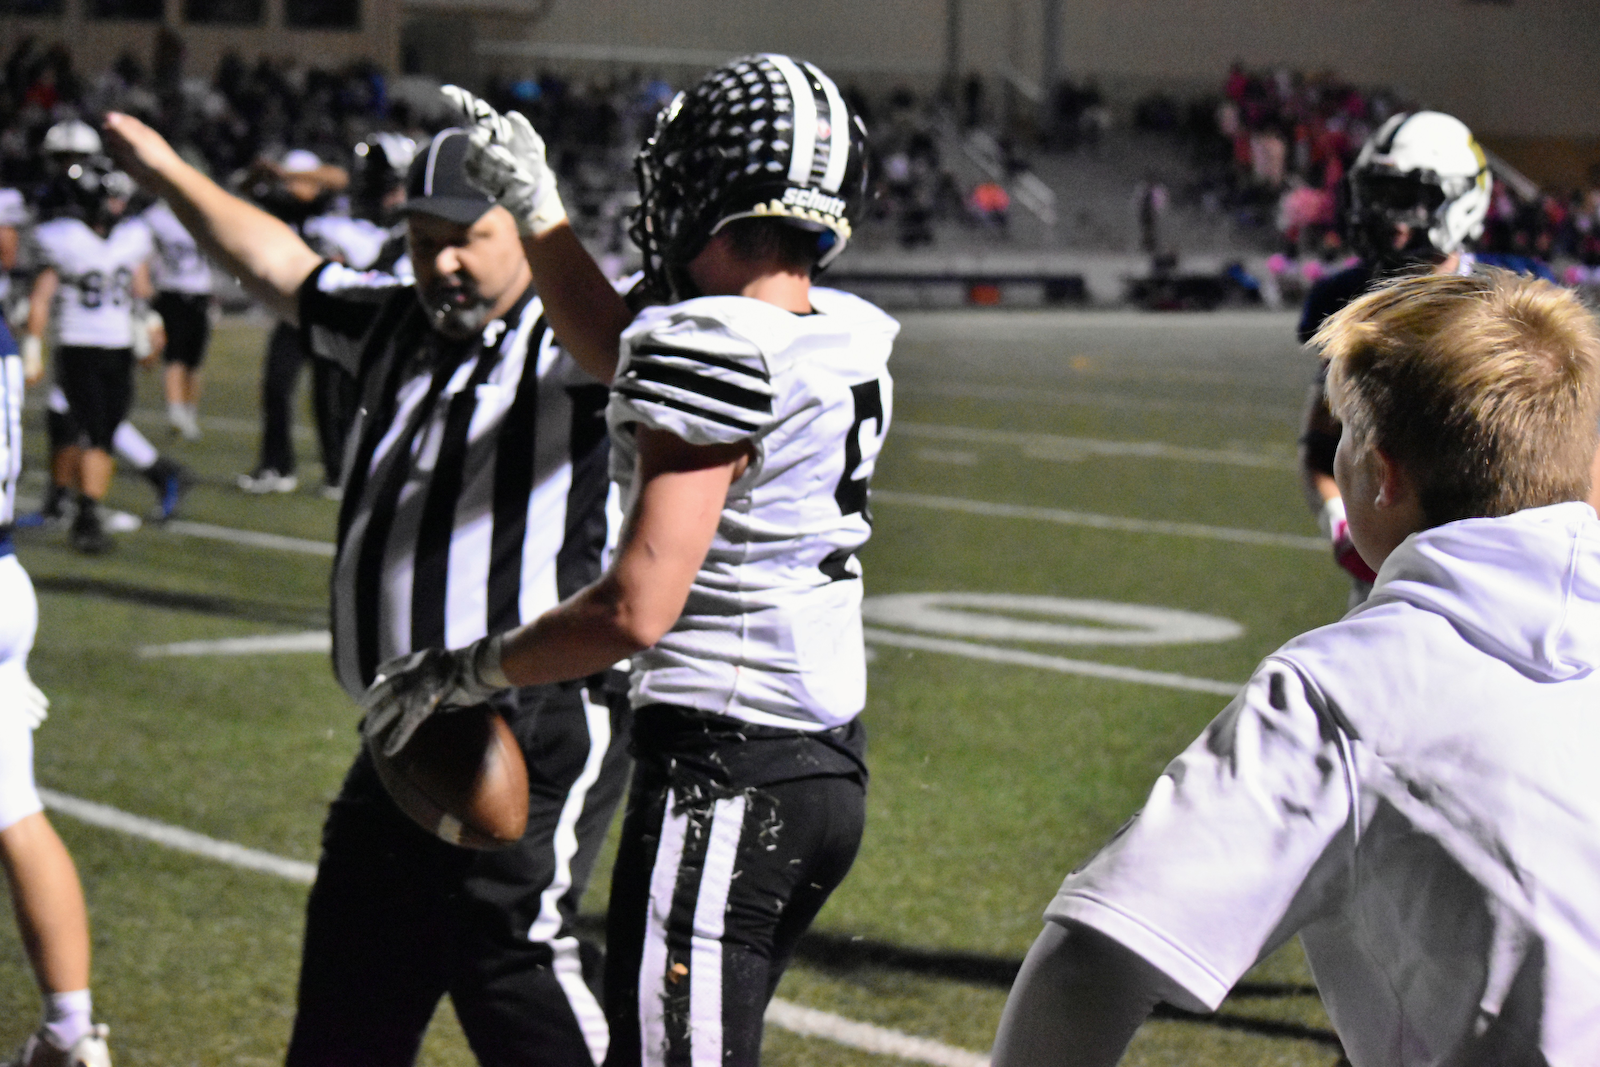 Springs Valley opens Sectional 48 play at Providence gallery cover photo